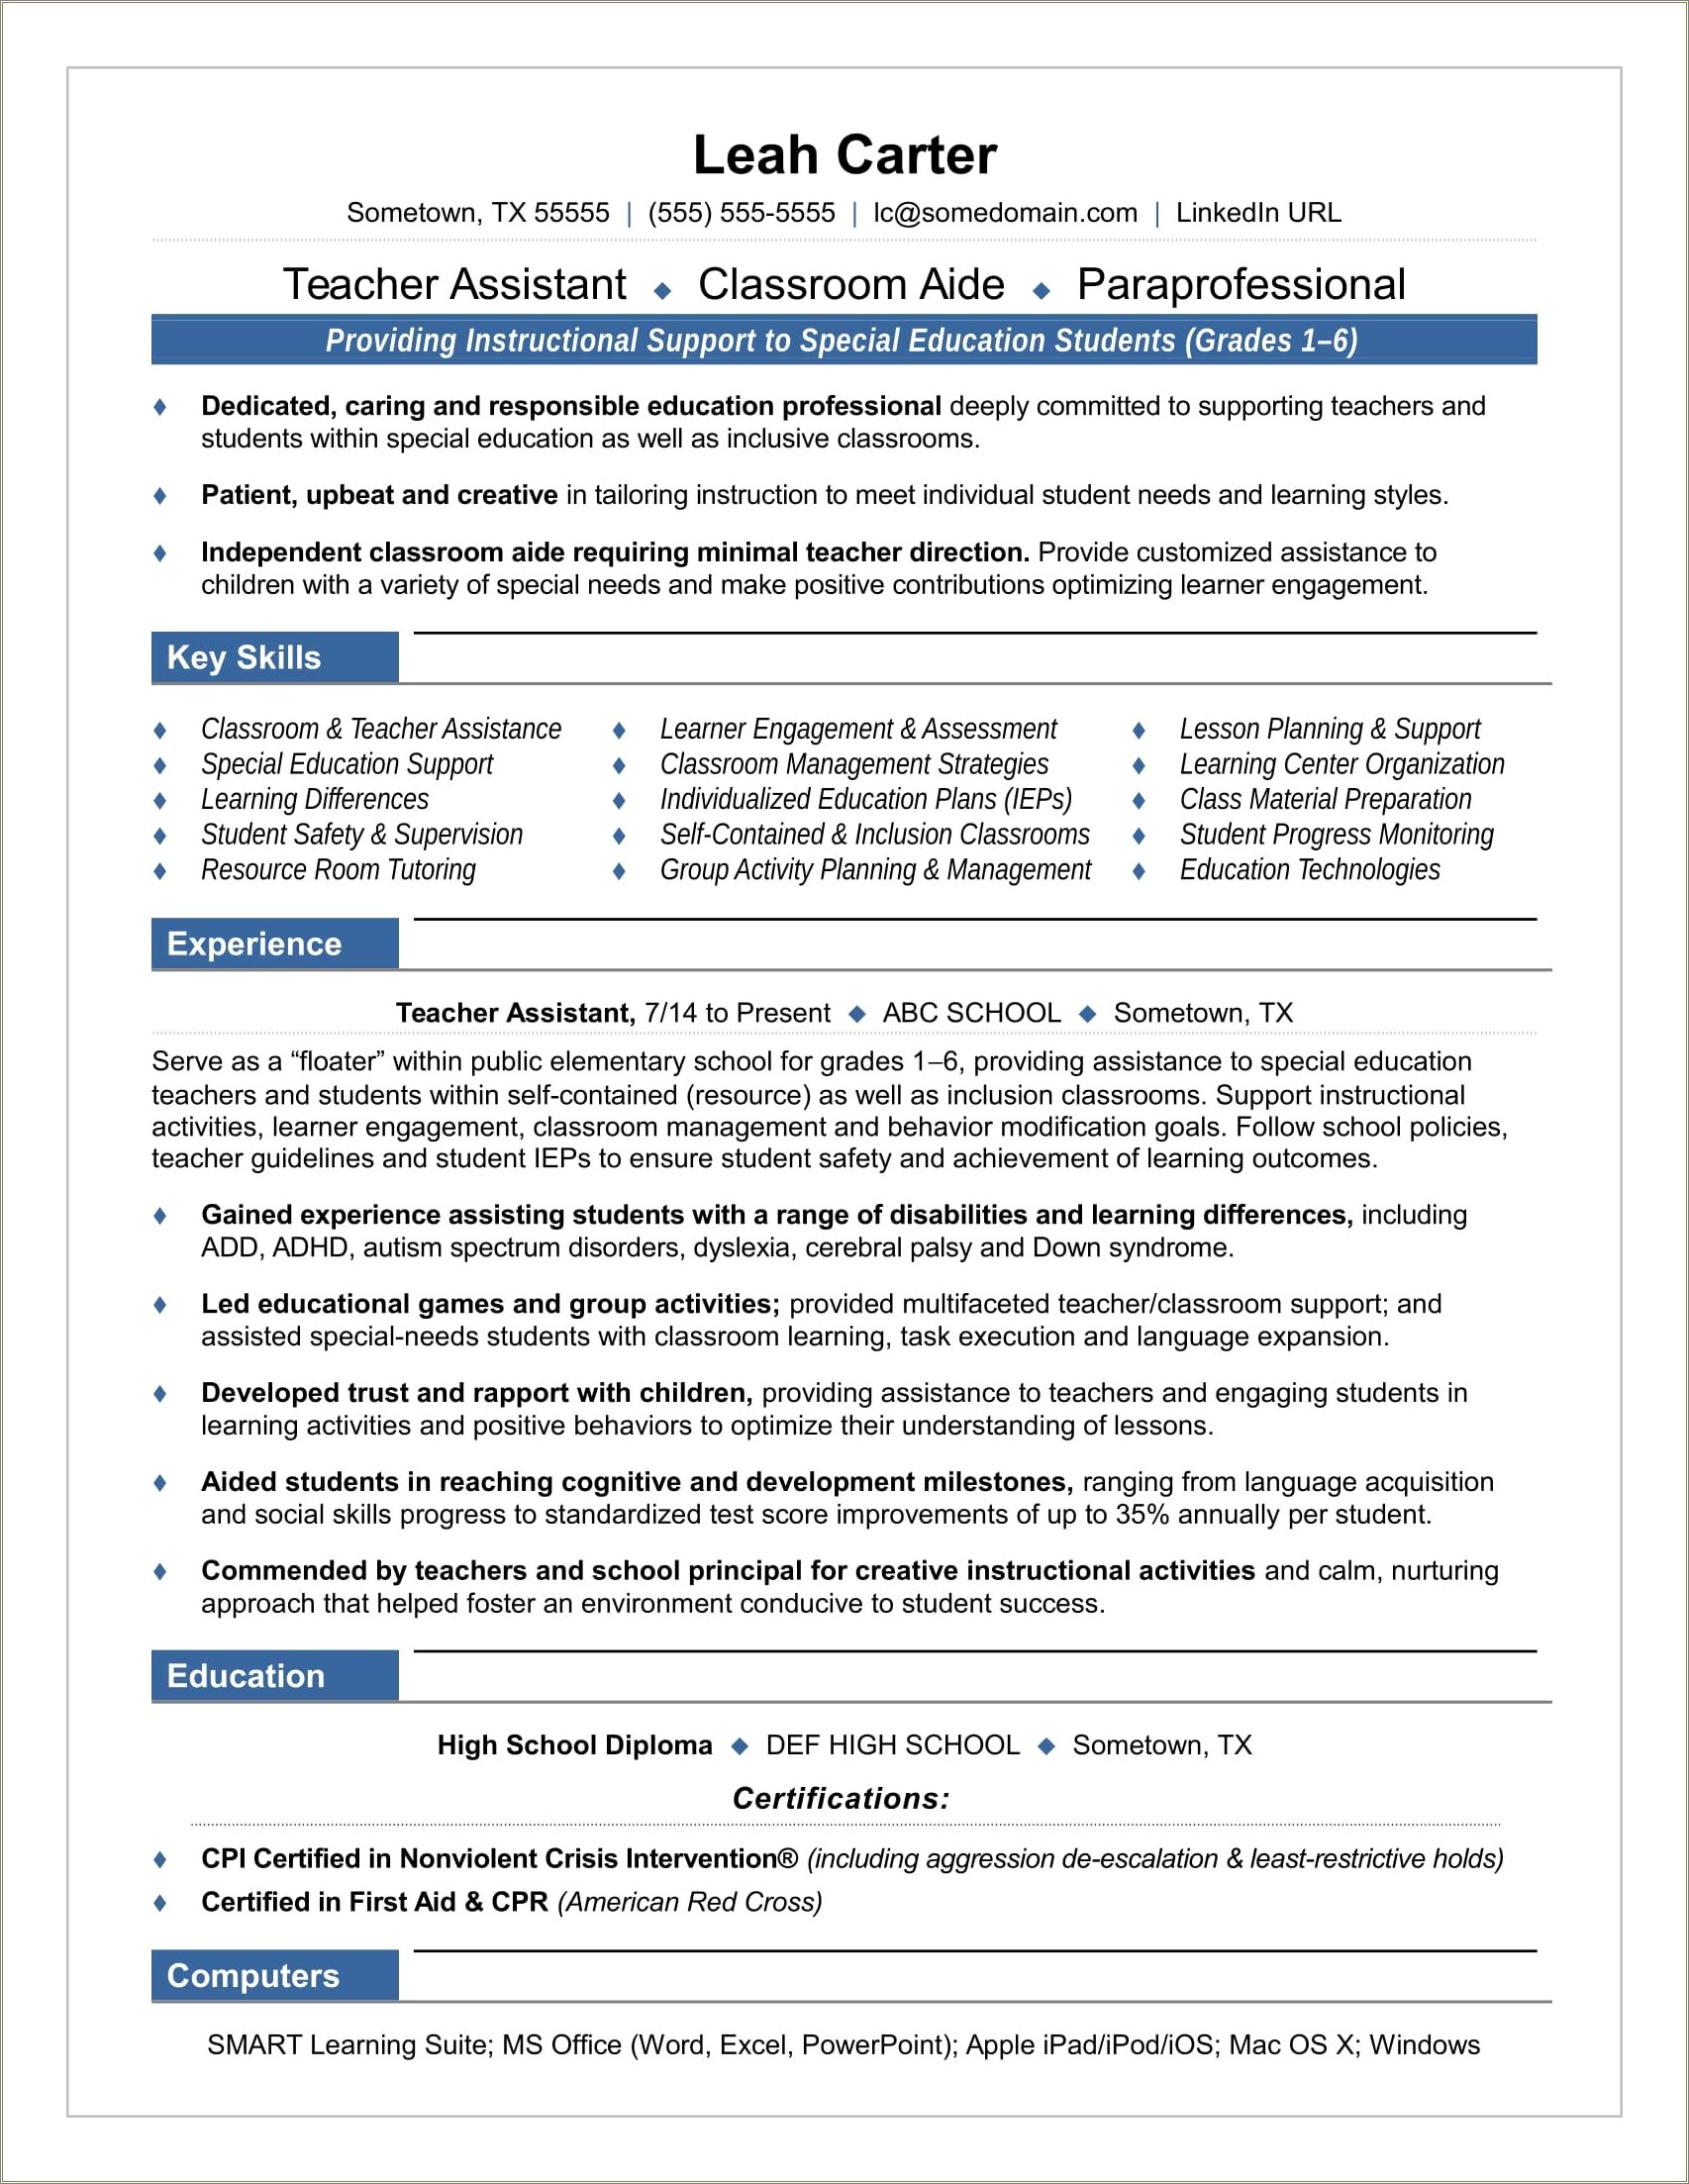 Sample Resume With Teaching Certifications On It